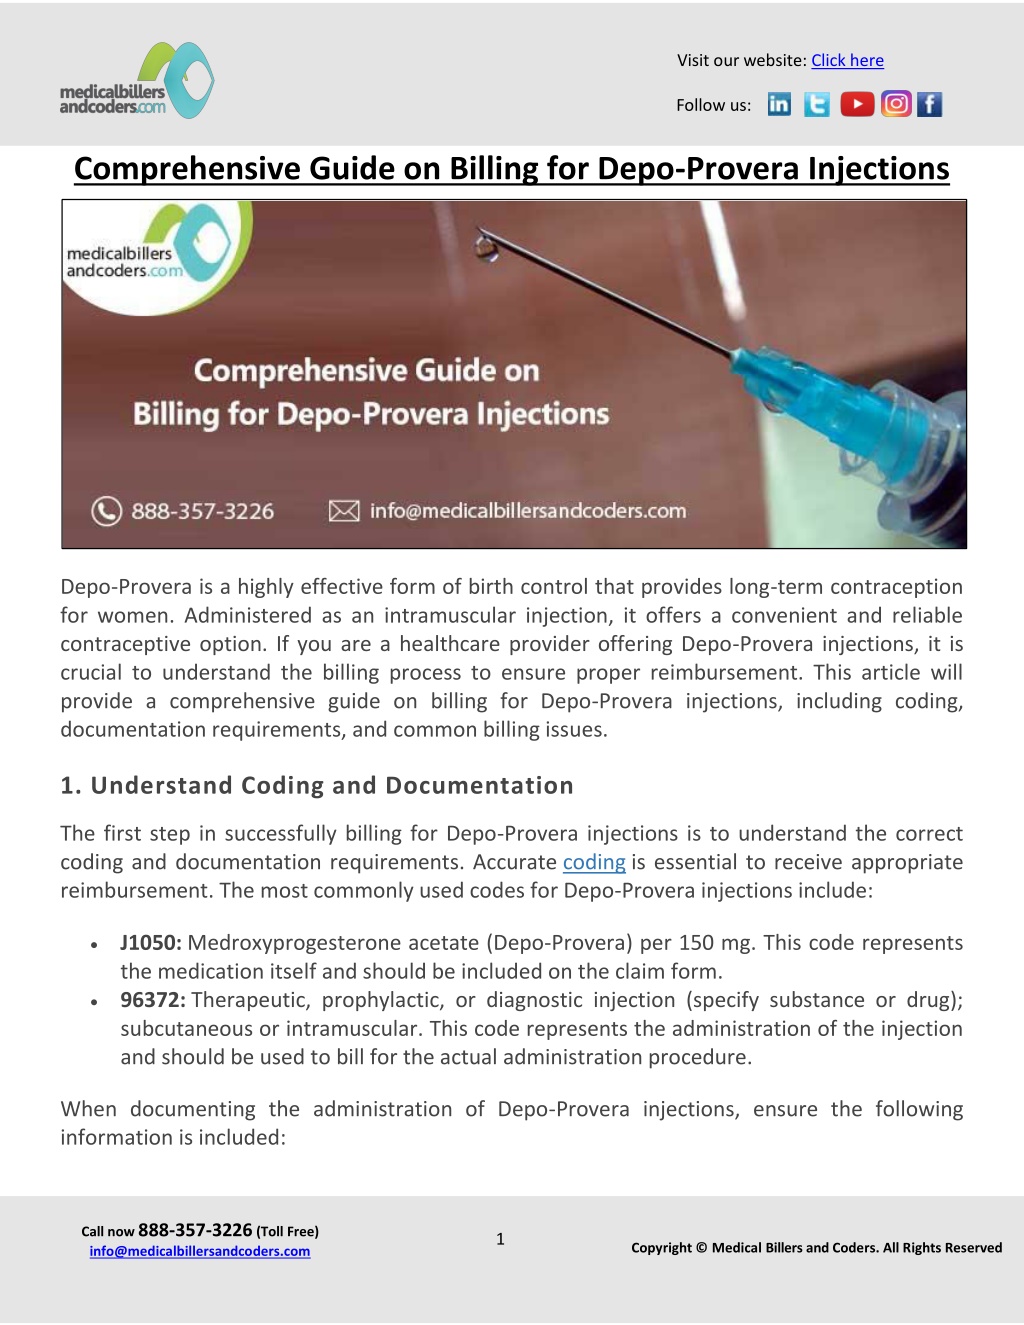 Ppt Comprehensive Guide On Billing For Depo Provera Injections Powerpoint Presentation Id